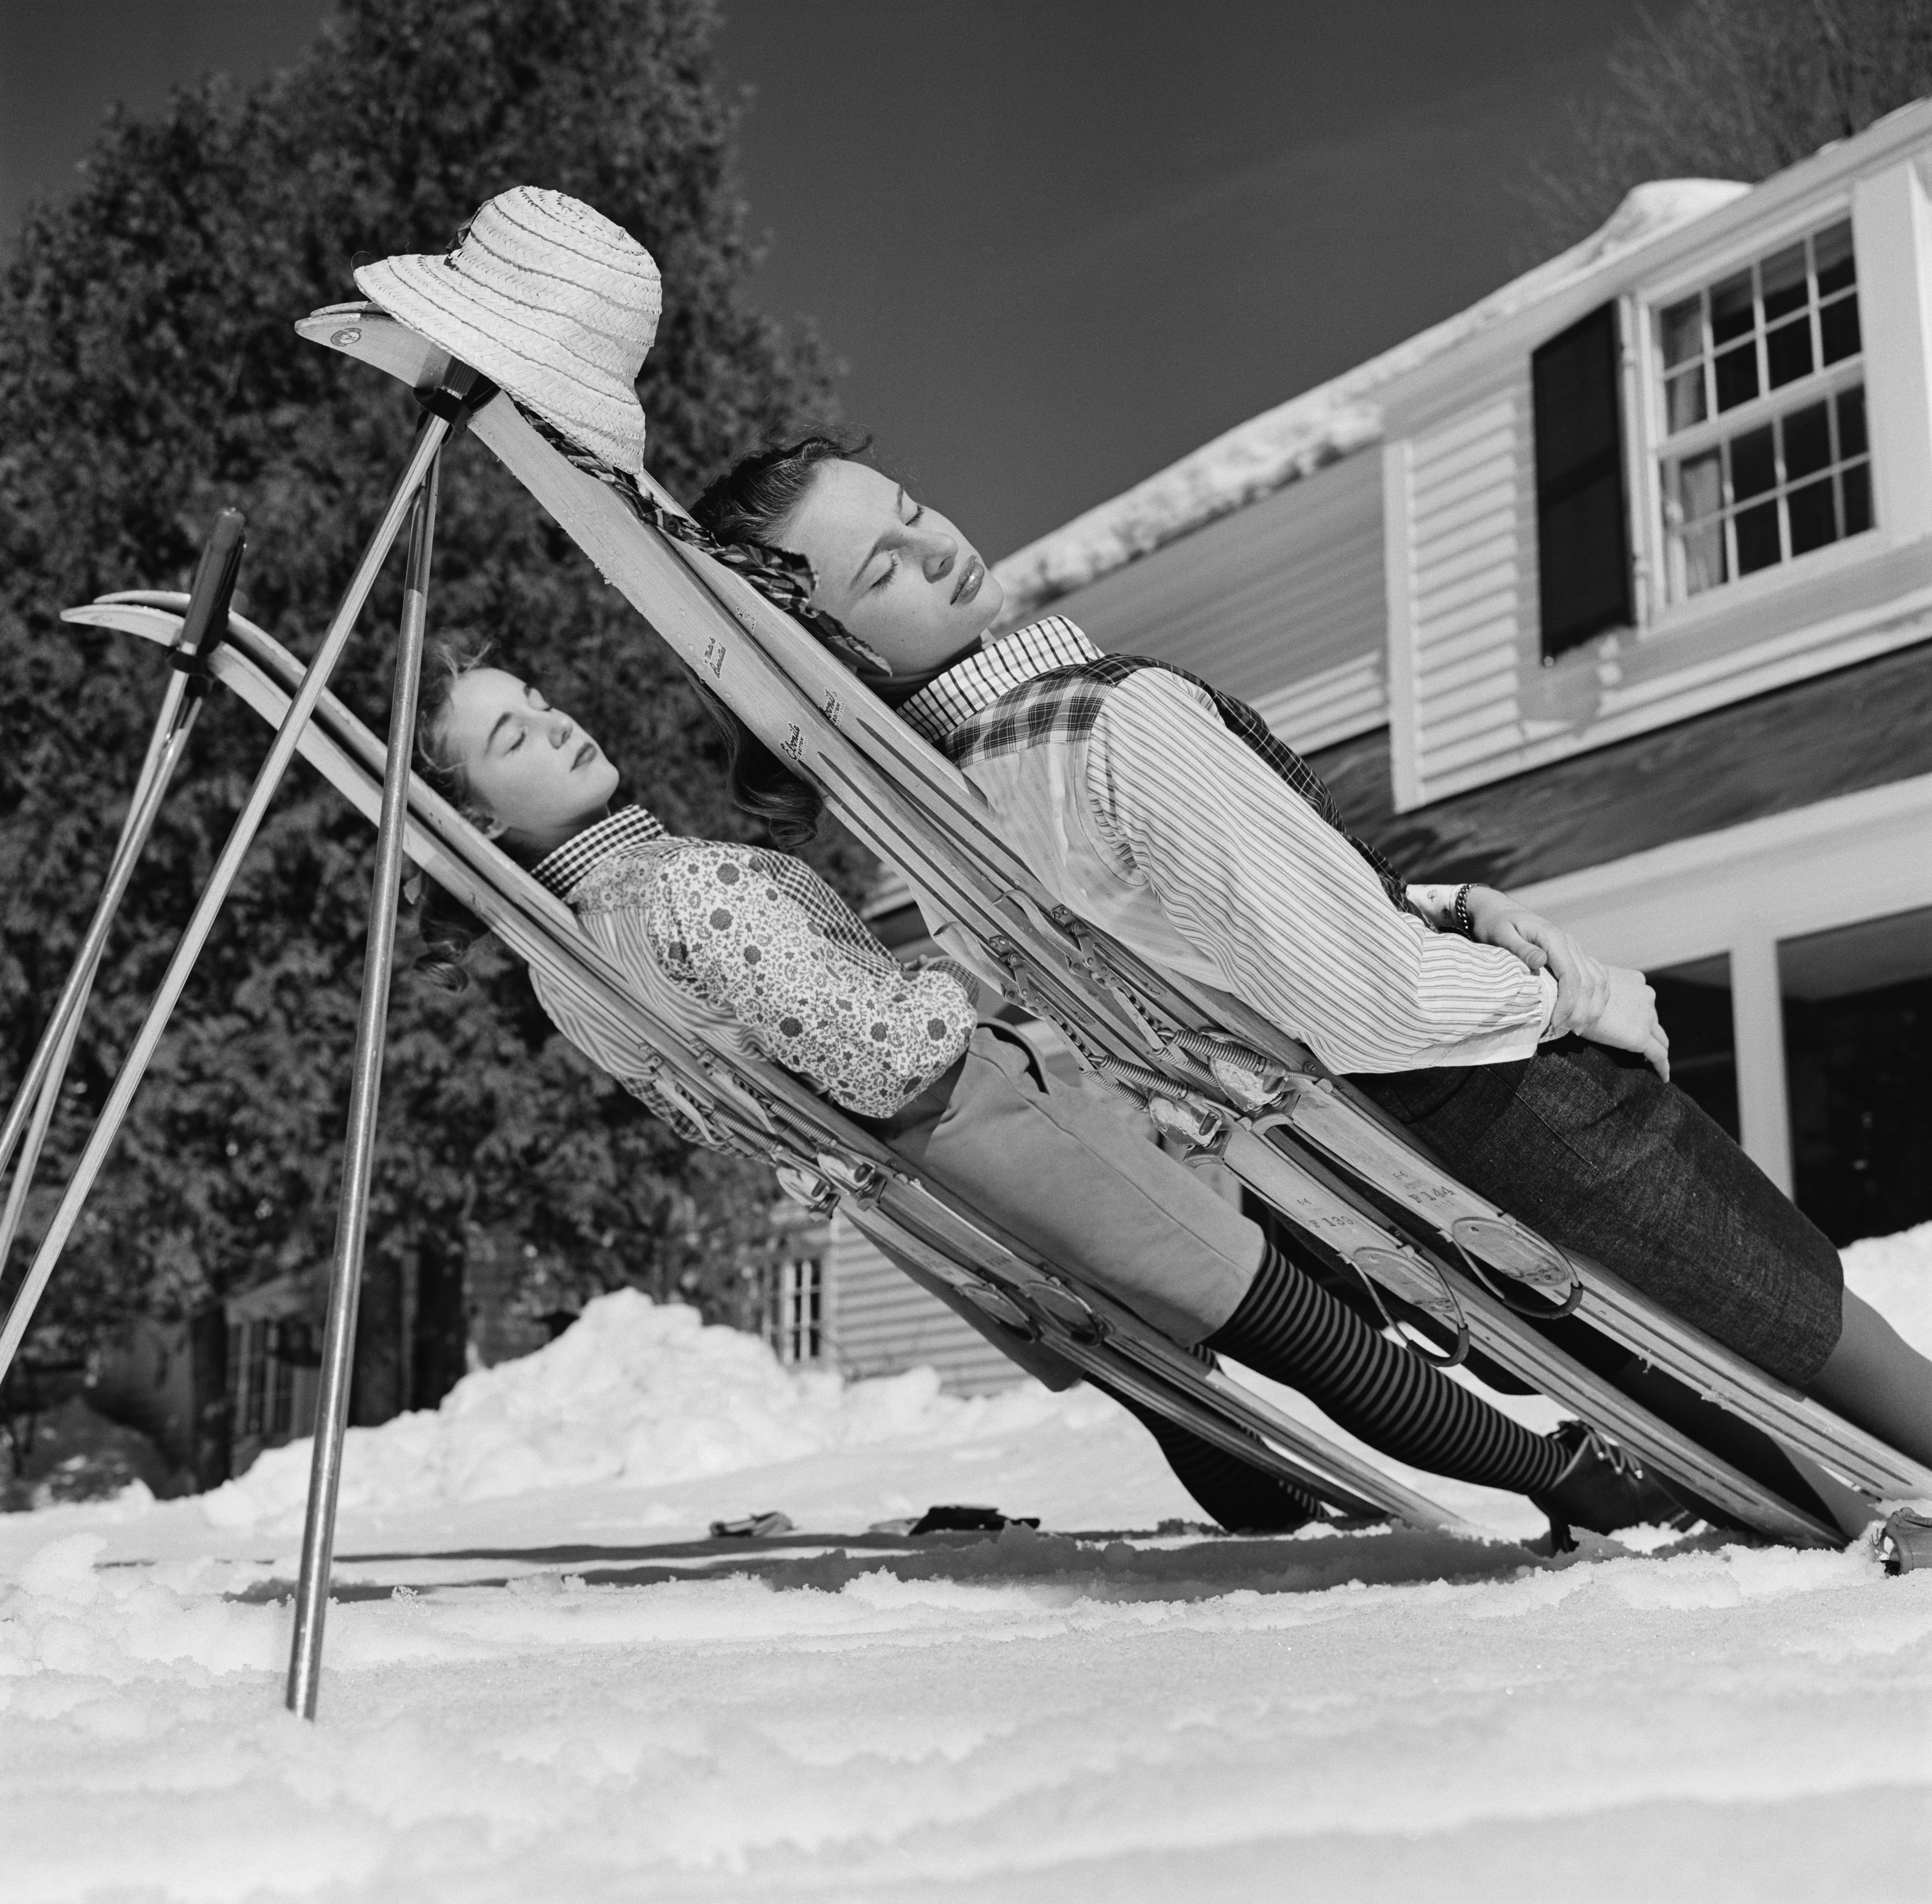 'New England Skiing' 1955 Slim Aarons Limited Estate Edition

Two women recline on improvised sunbeds in New Hampshire, 1955. 

Silver Gelatin Fibre Print
Produced from the original negative
Certificate of authenticity supplied 
30x30 inches / 76 x